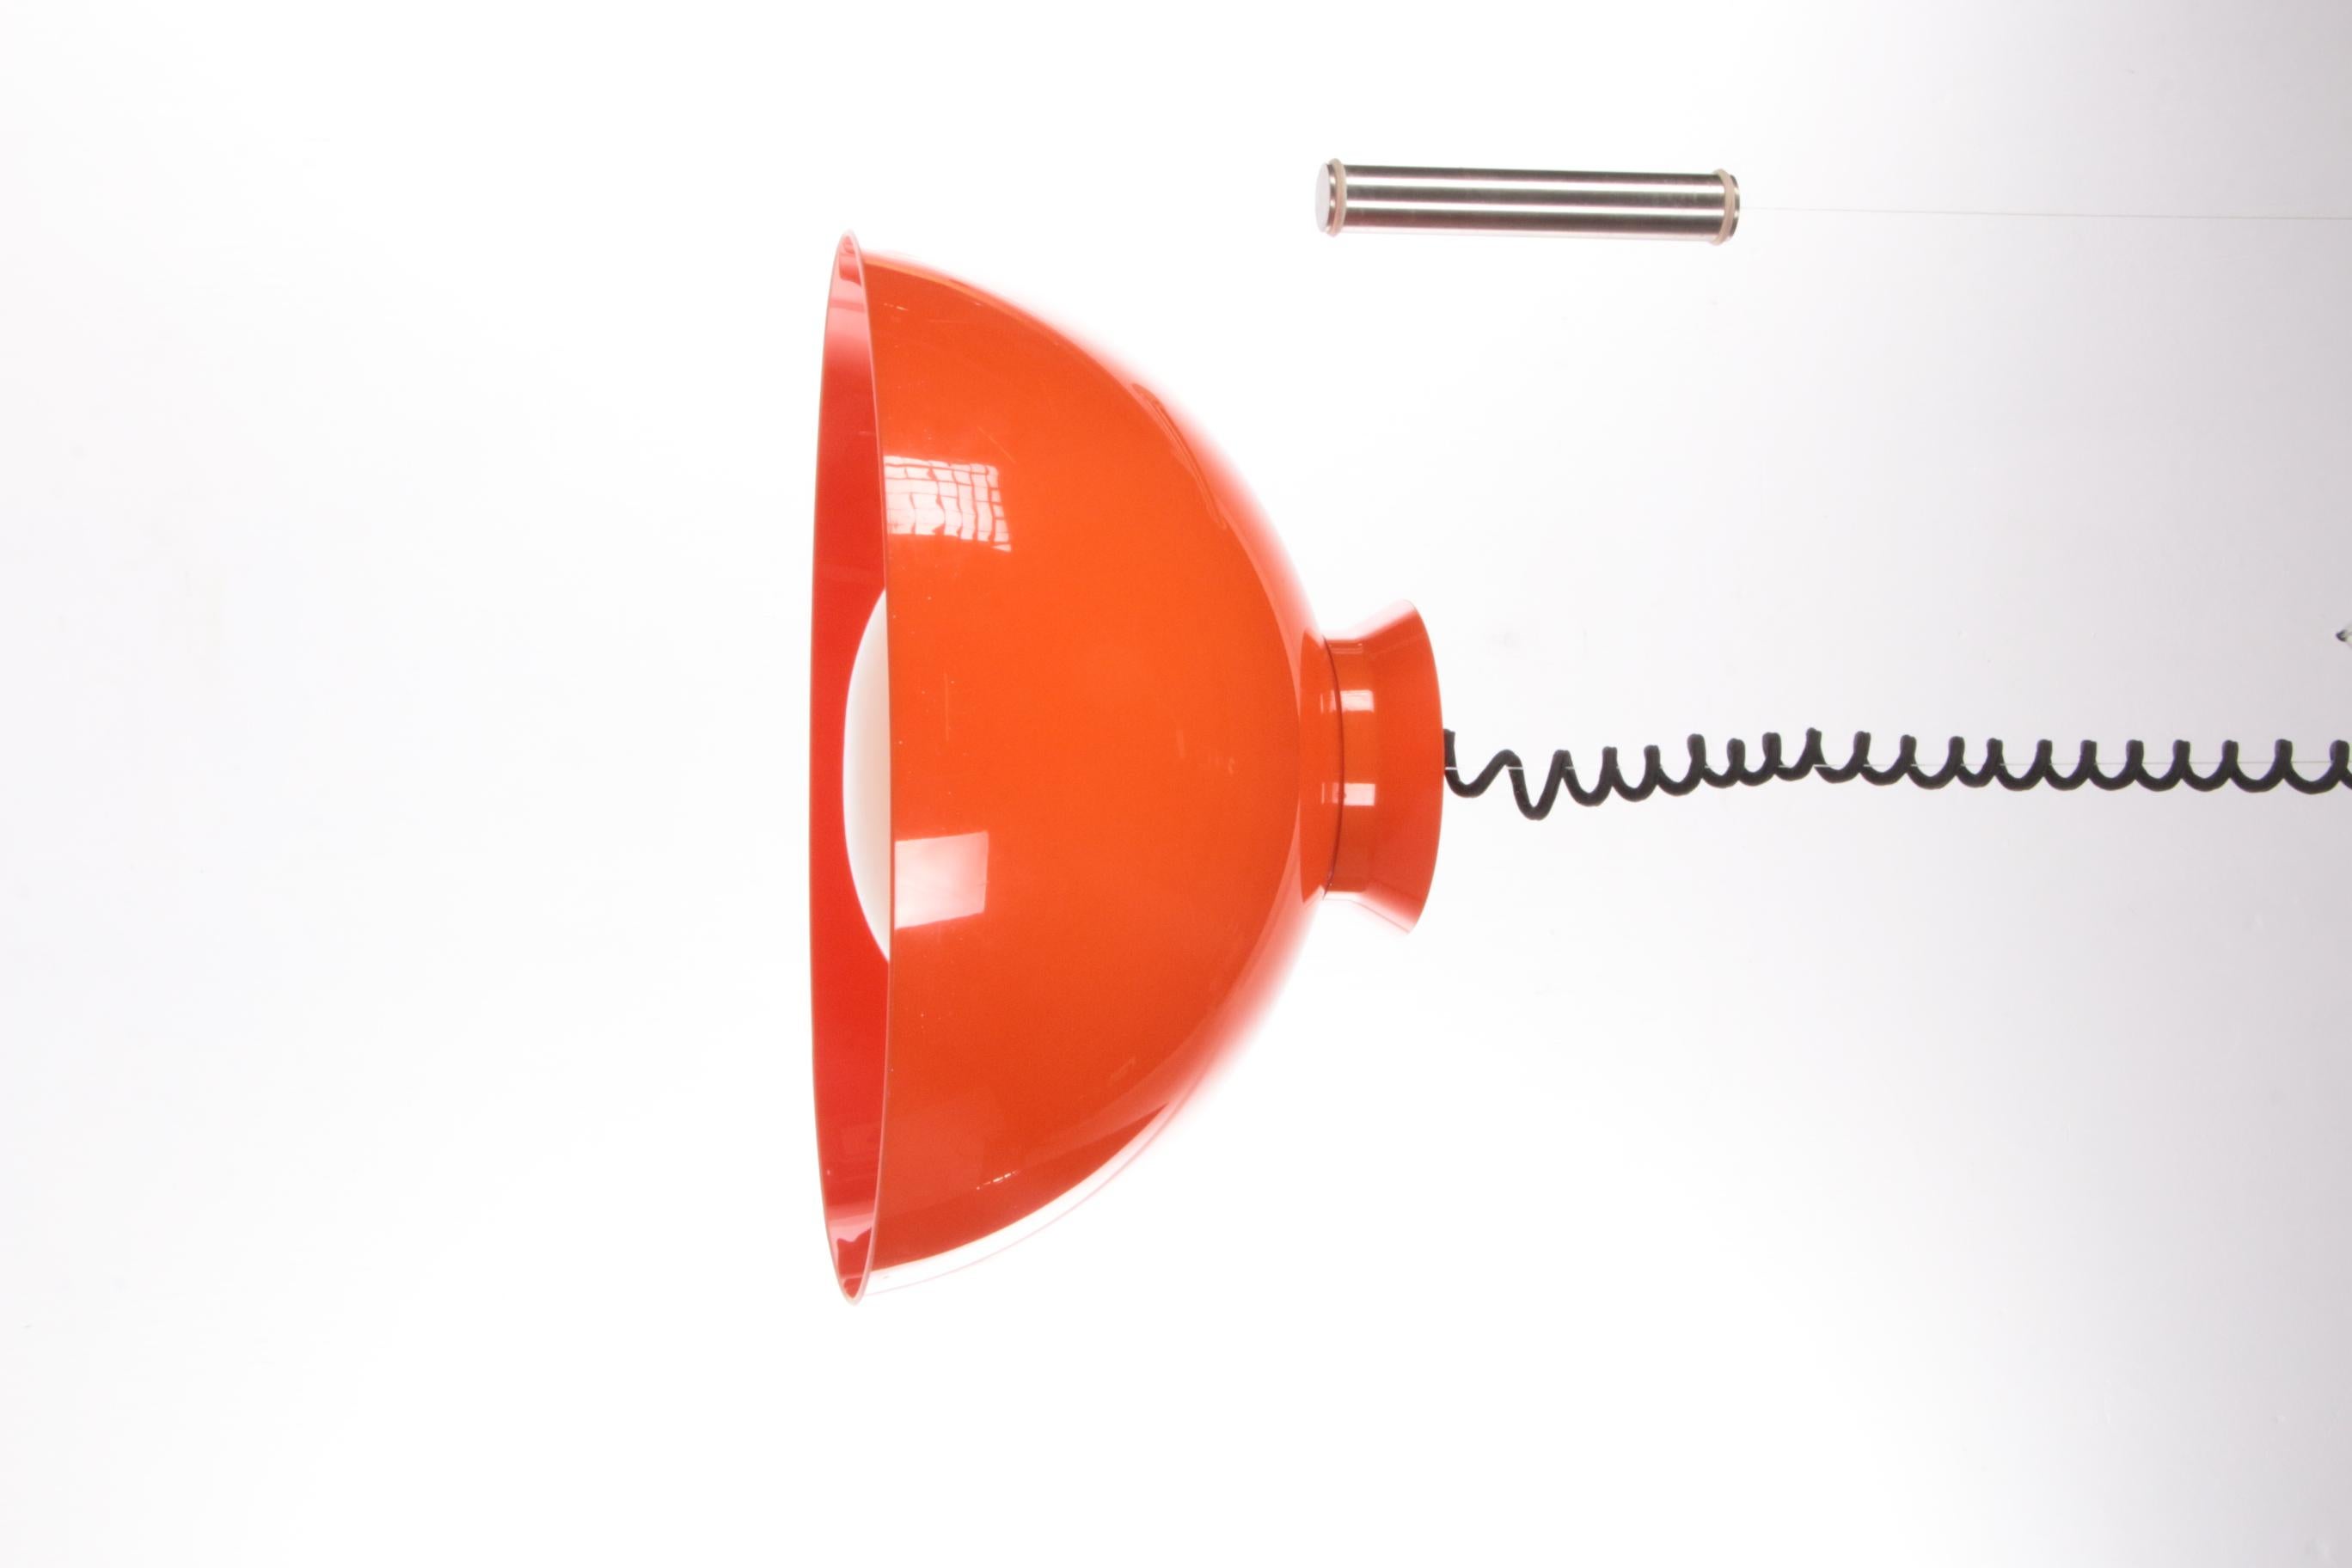 Plastic Hanging Lamp Orange Design by Achille & Pier Giacomo by Kartell, 1959 For Sale